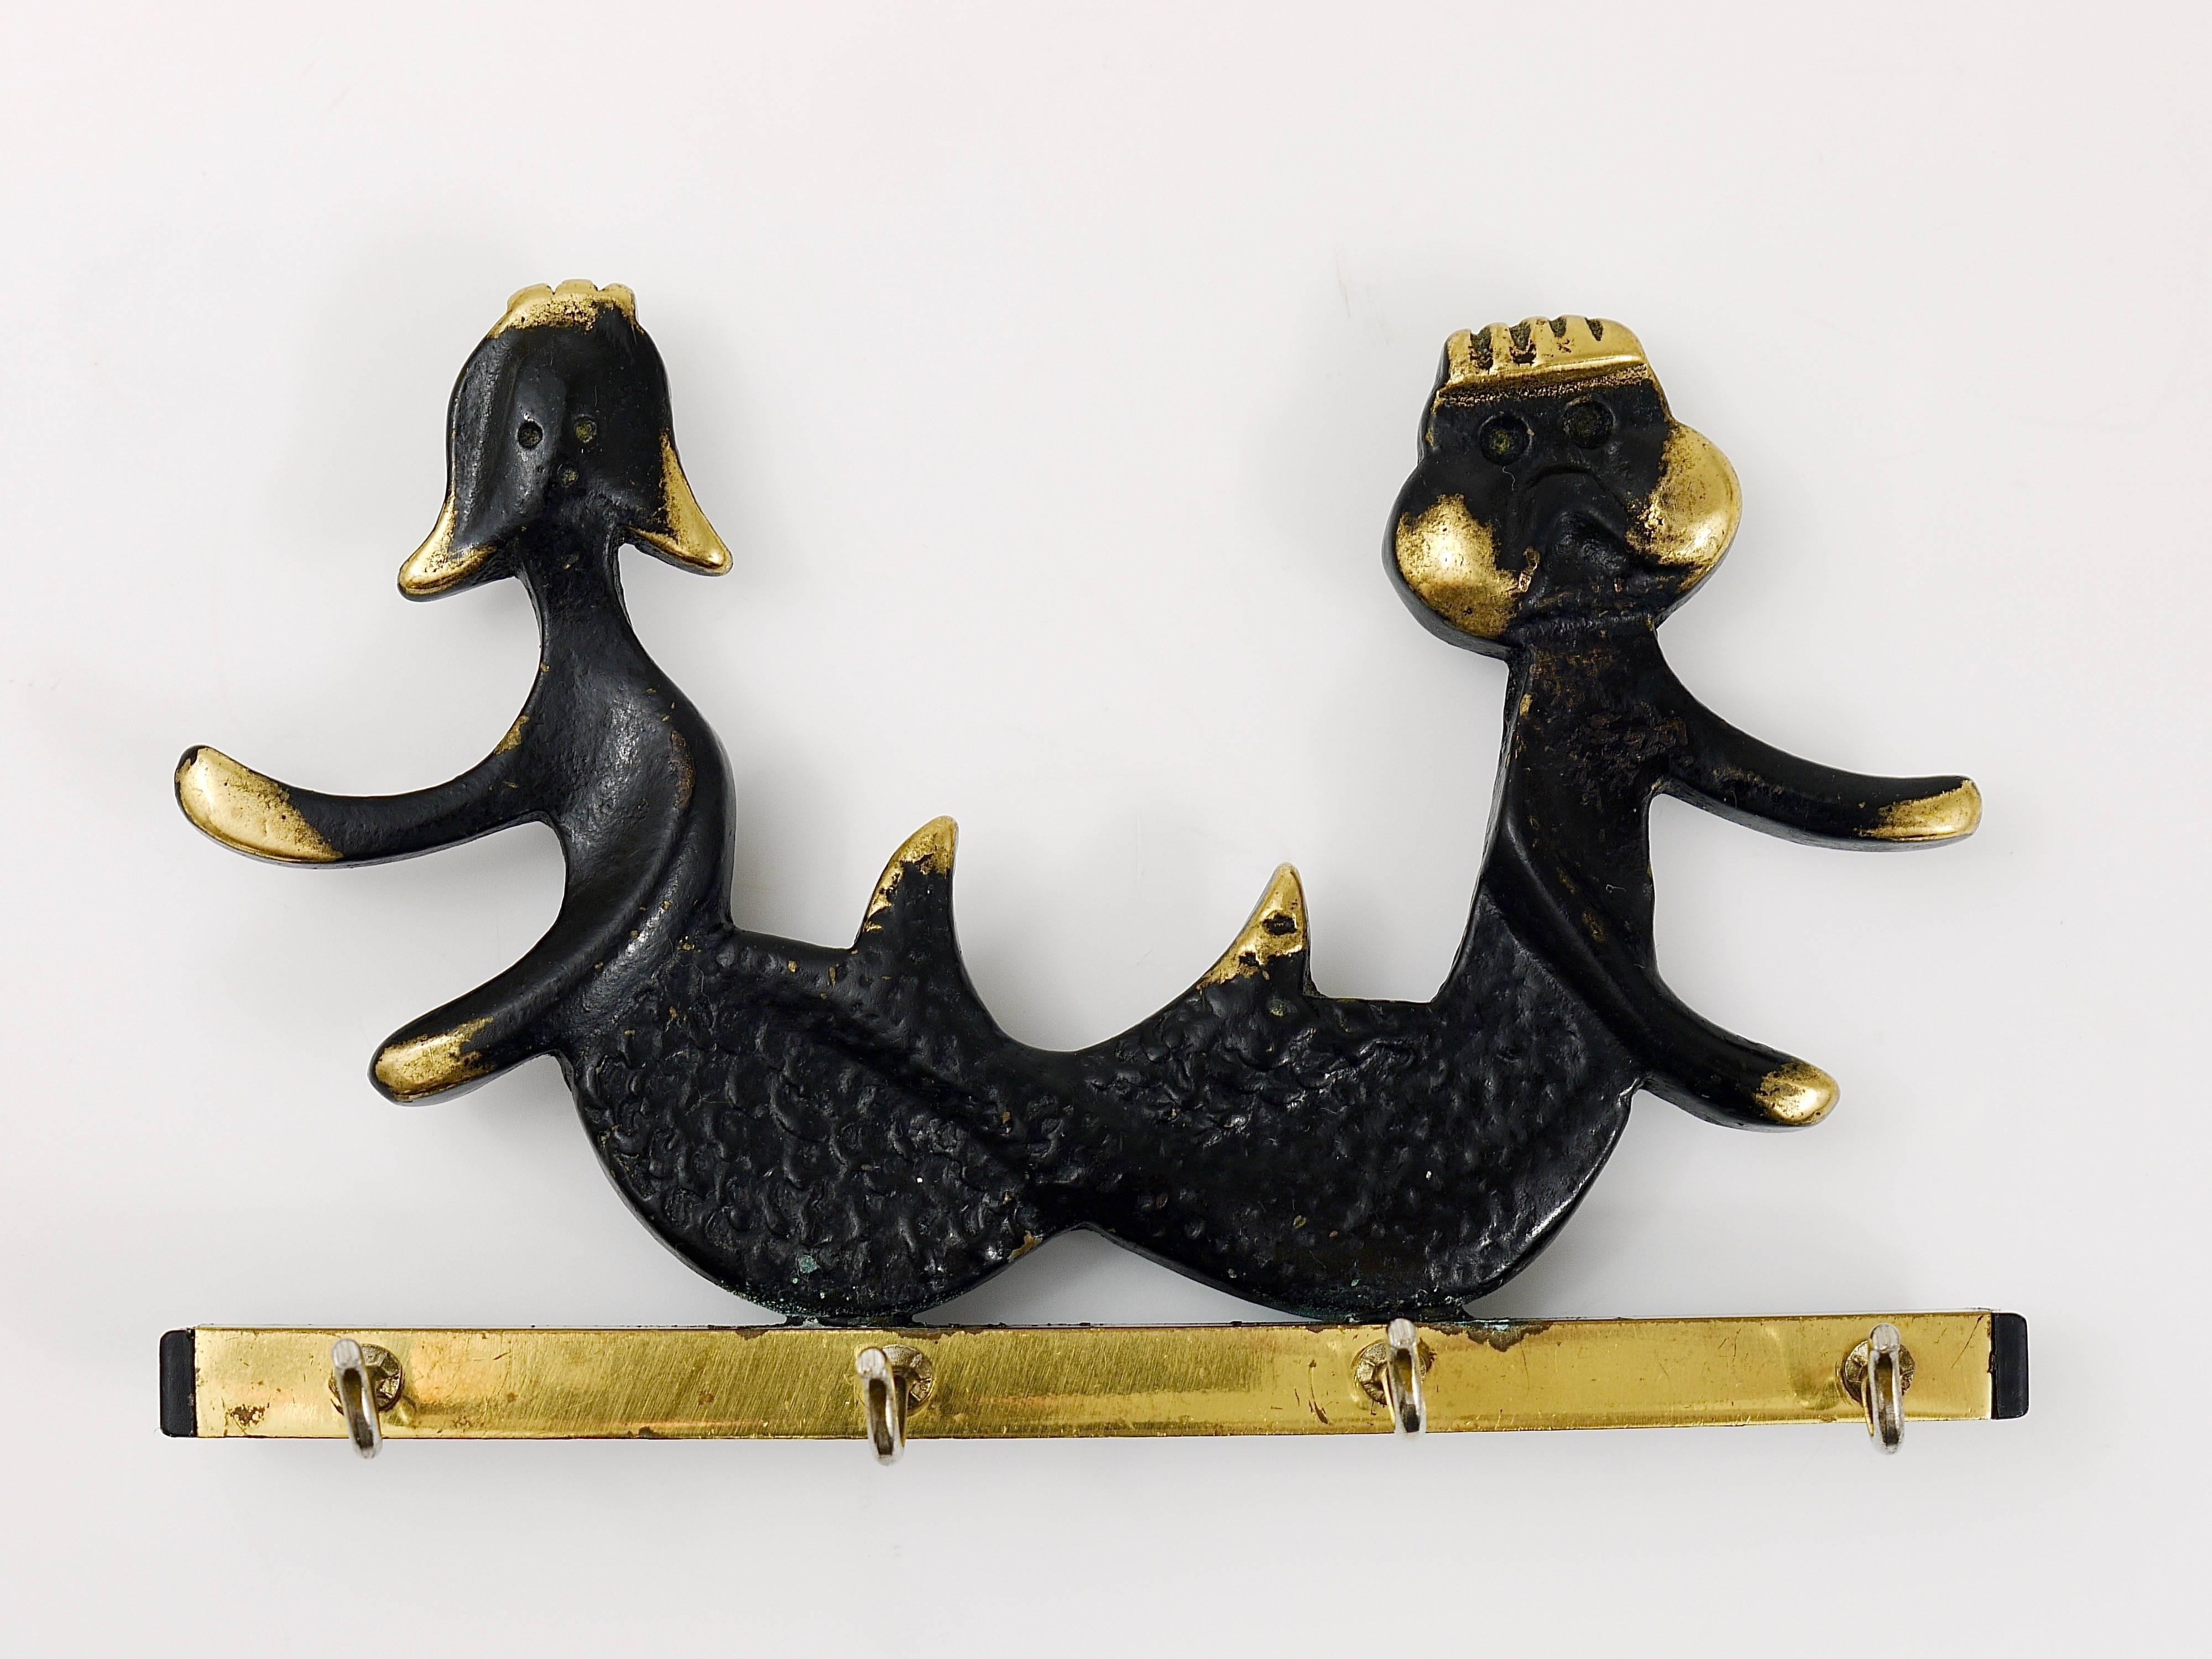 A charming and rare key holder, displaying a sea god and a mermaid. A humorous design by Walter Bosse, executed by Hertha Baller Austria in the 1950s. Made of brass, in good condition with nice patina. Also suitable as a towel holder or for dish